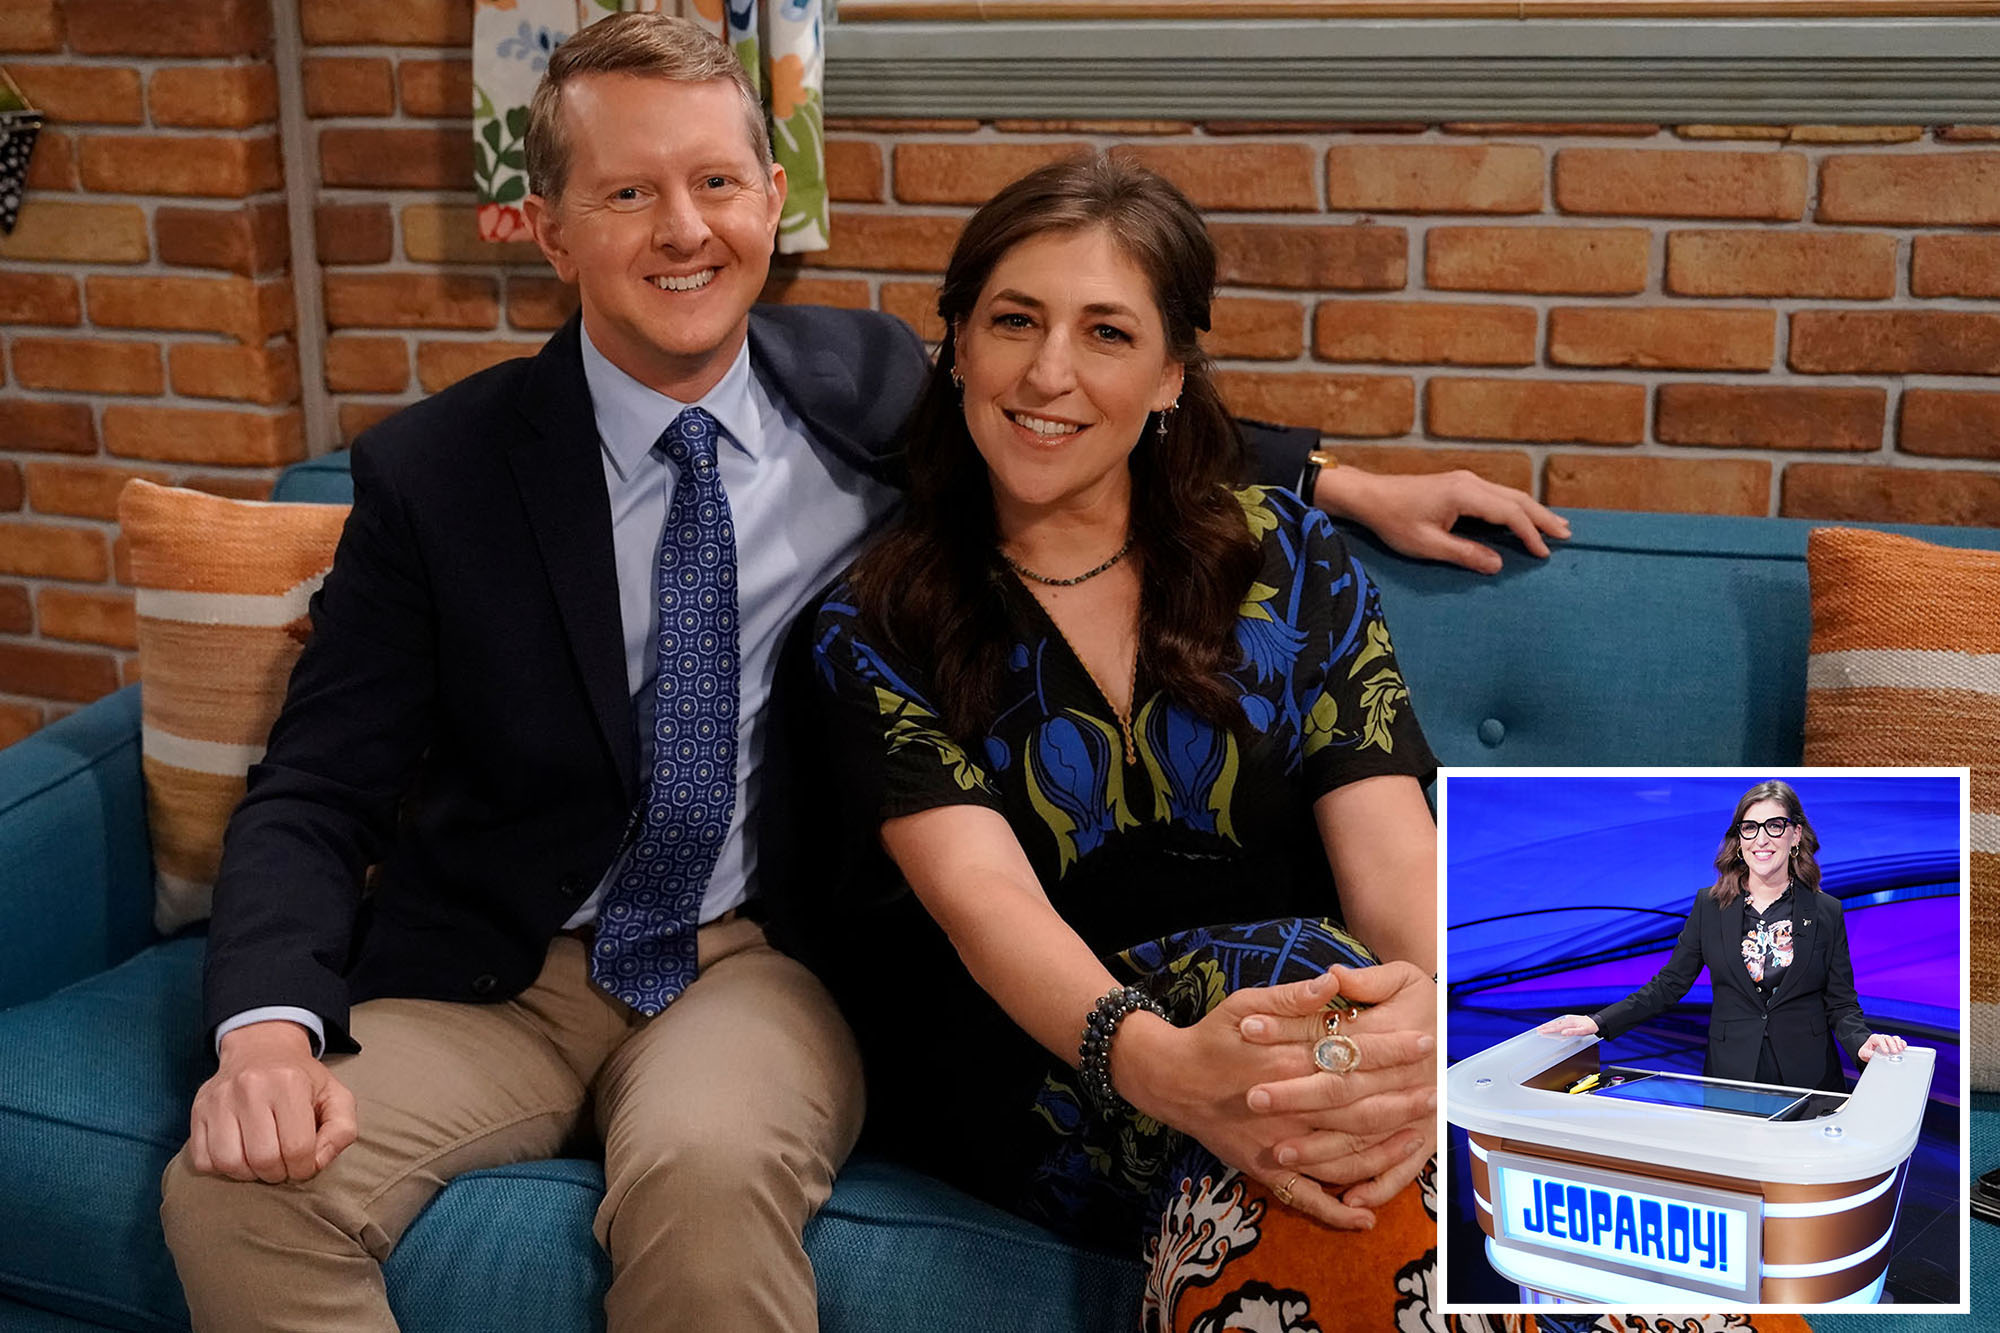 Mayim Bialik reveals exactly how she and 'Jeopardy!' cohost Ken